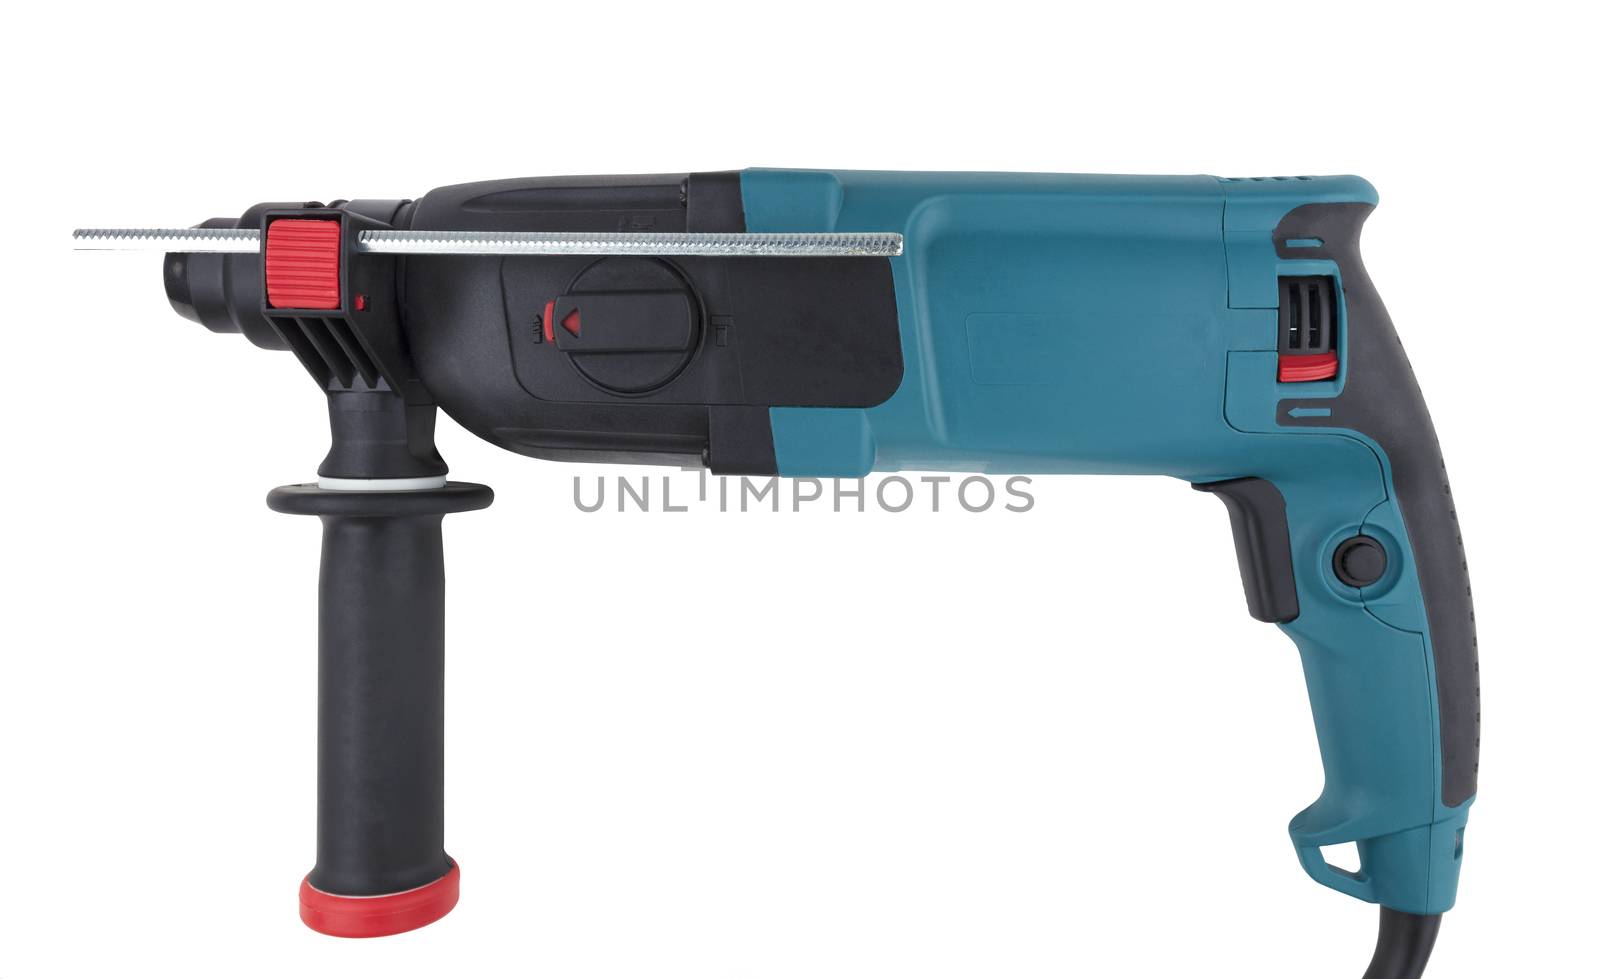 Manual electric drill-puncher of black and turquoise color for professional work in construction, isolated on white background